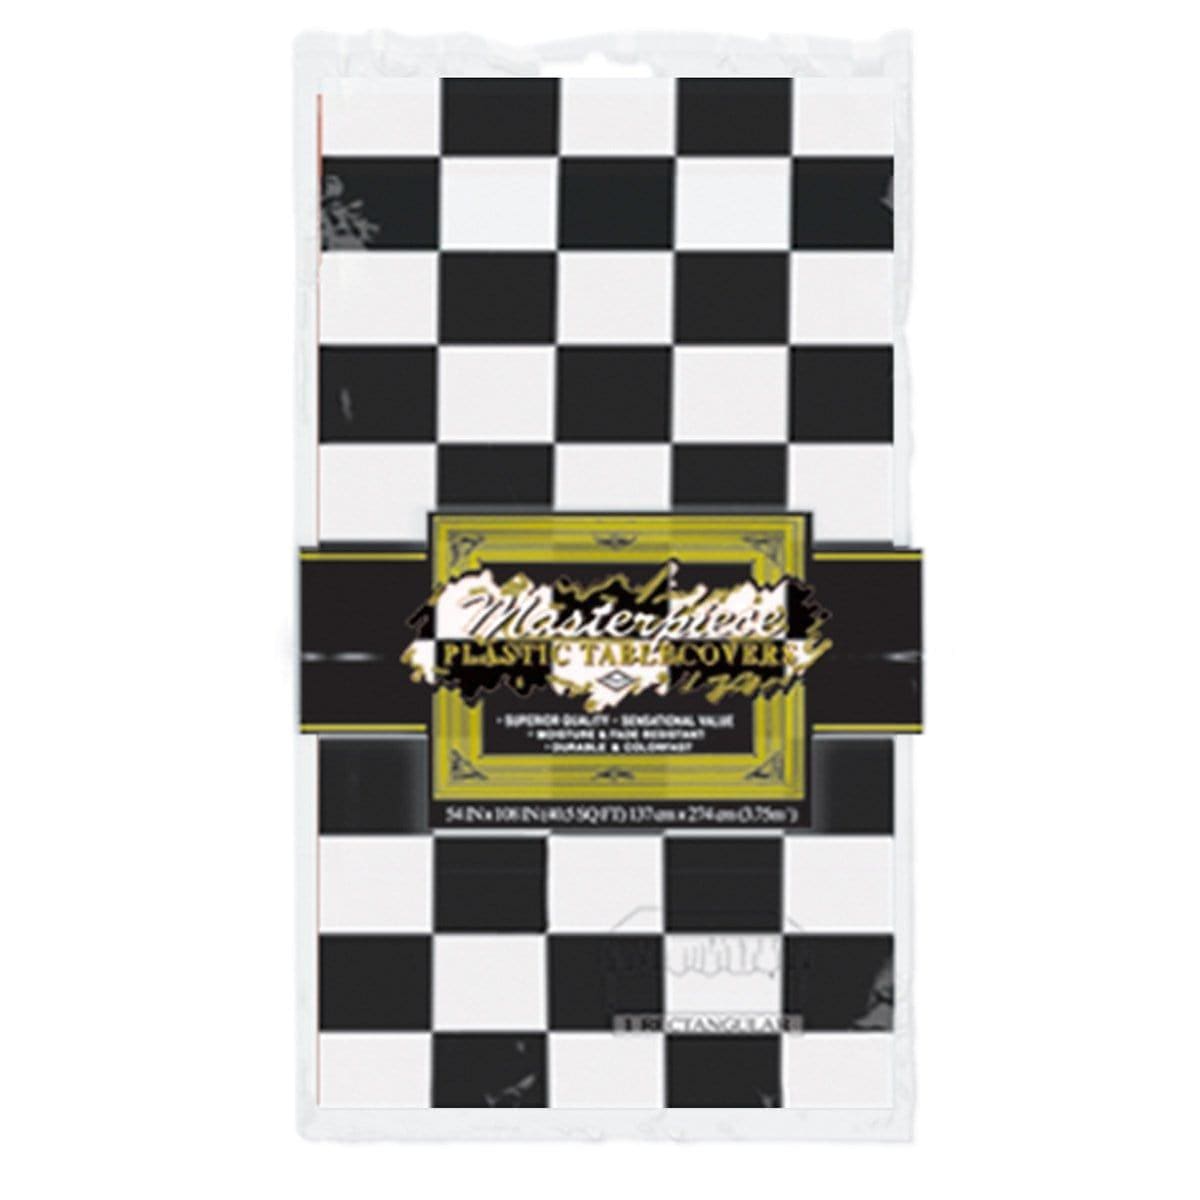 Buy Theme Party Checkered Plastic Tablecover sold at Party Expert